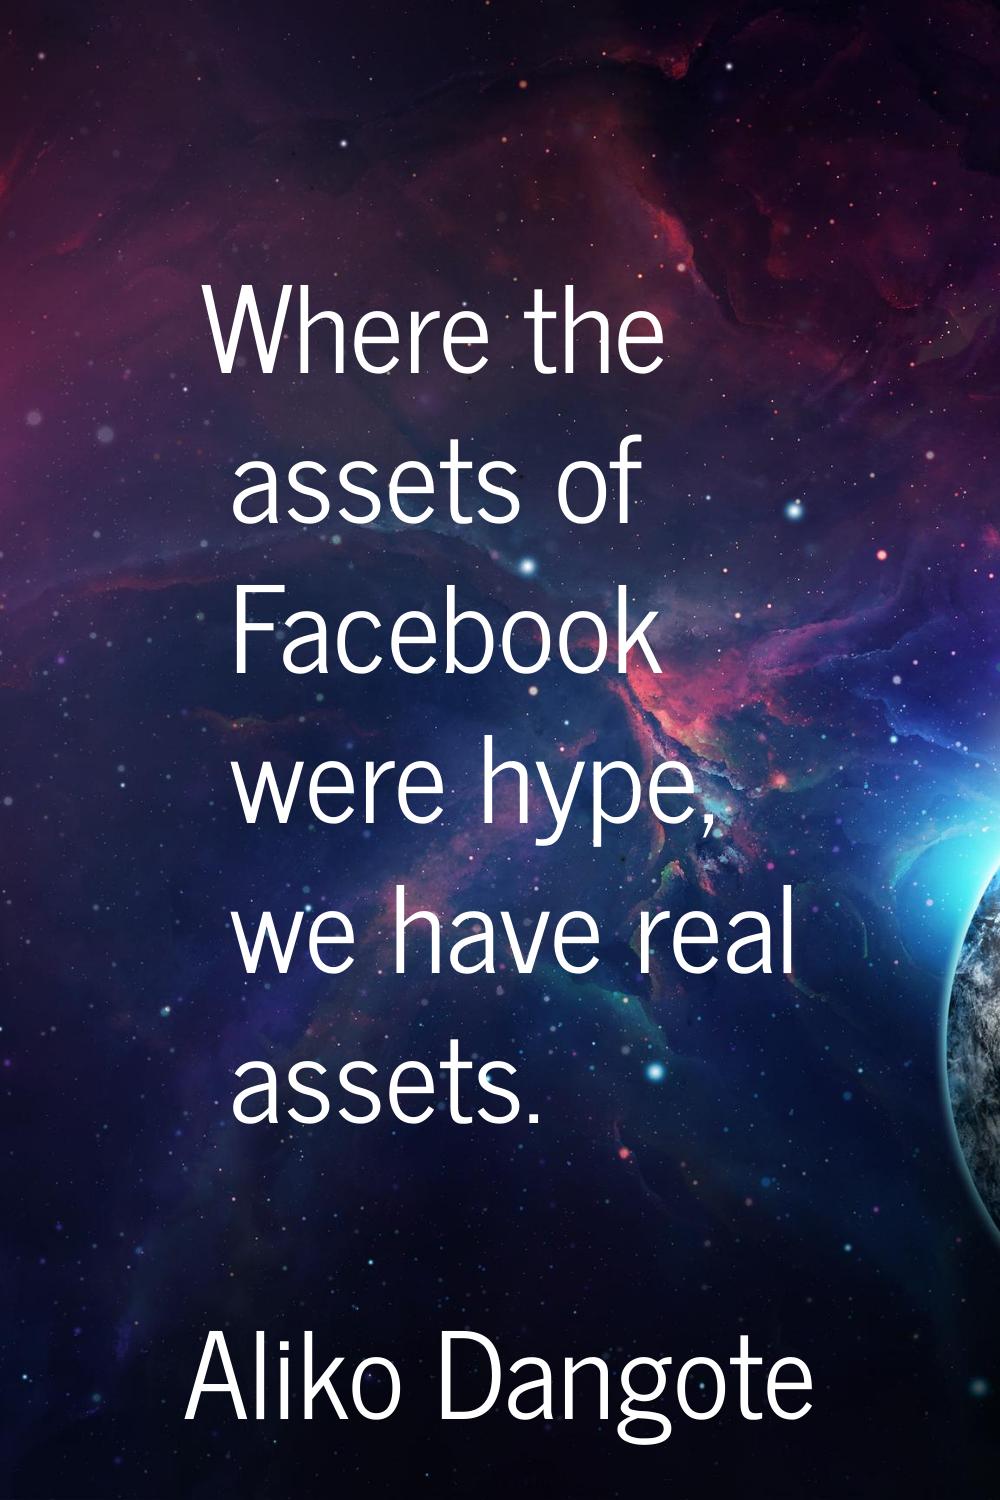 Where the assets of Facebook were hype, we have real assets.